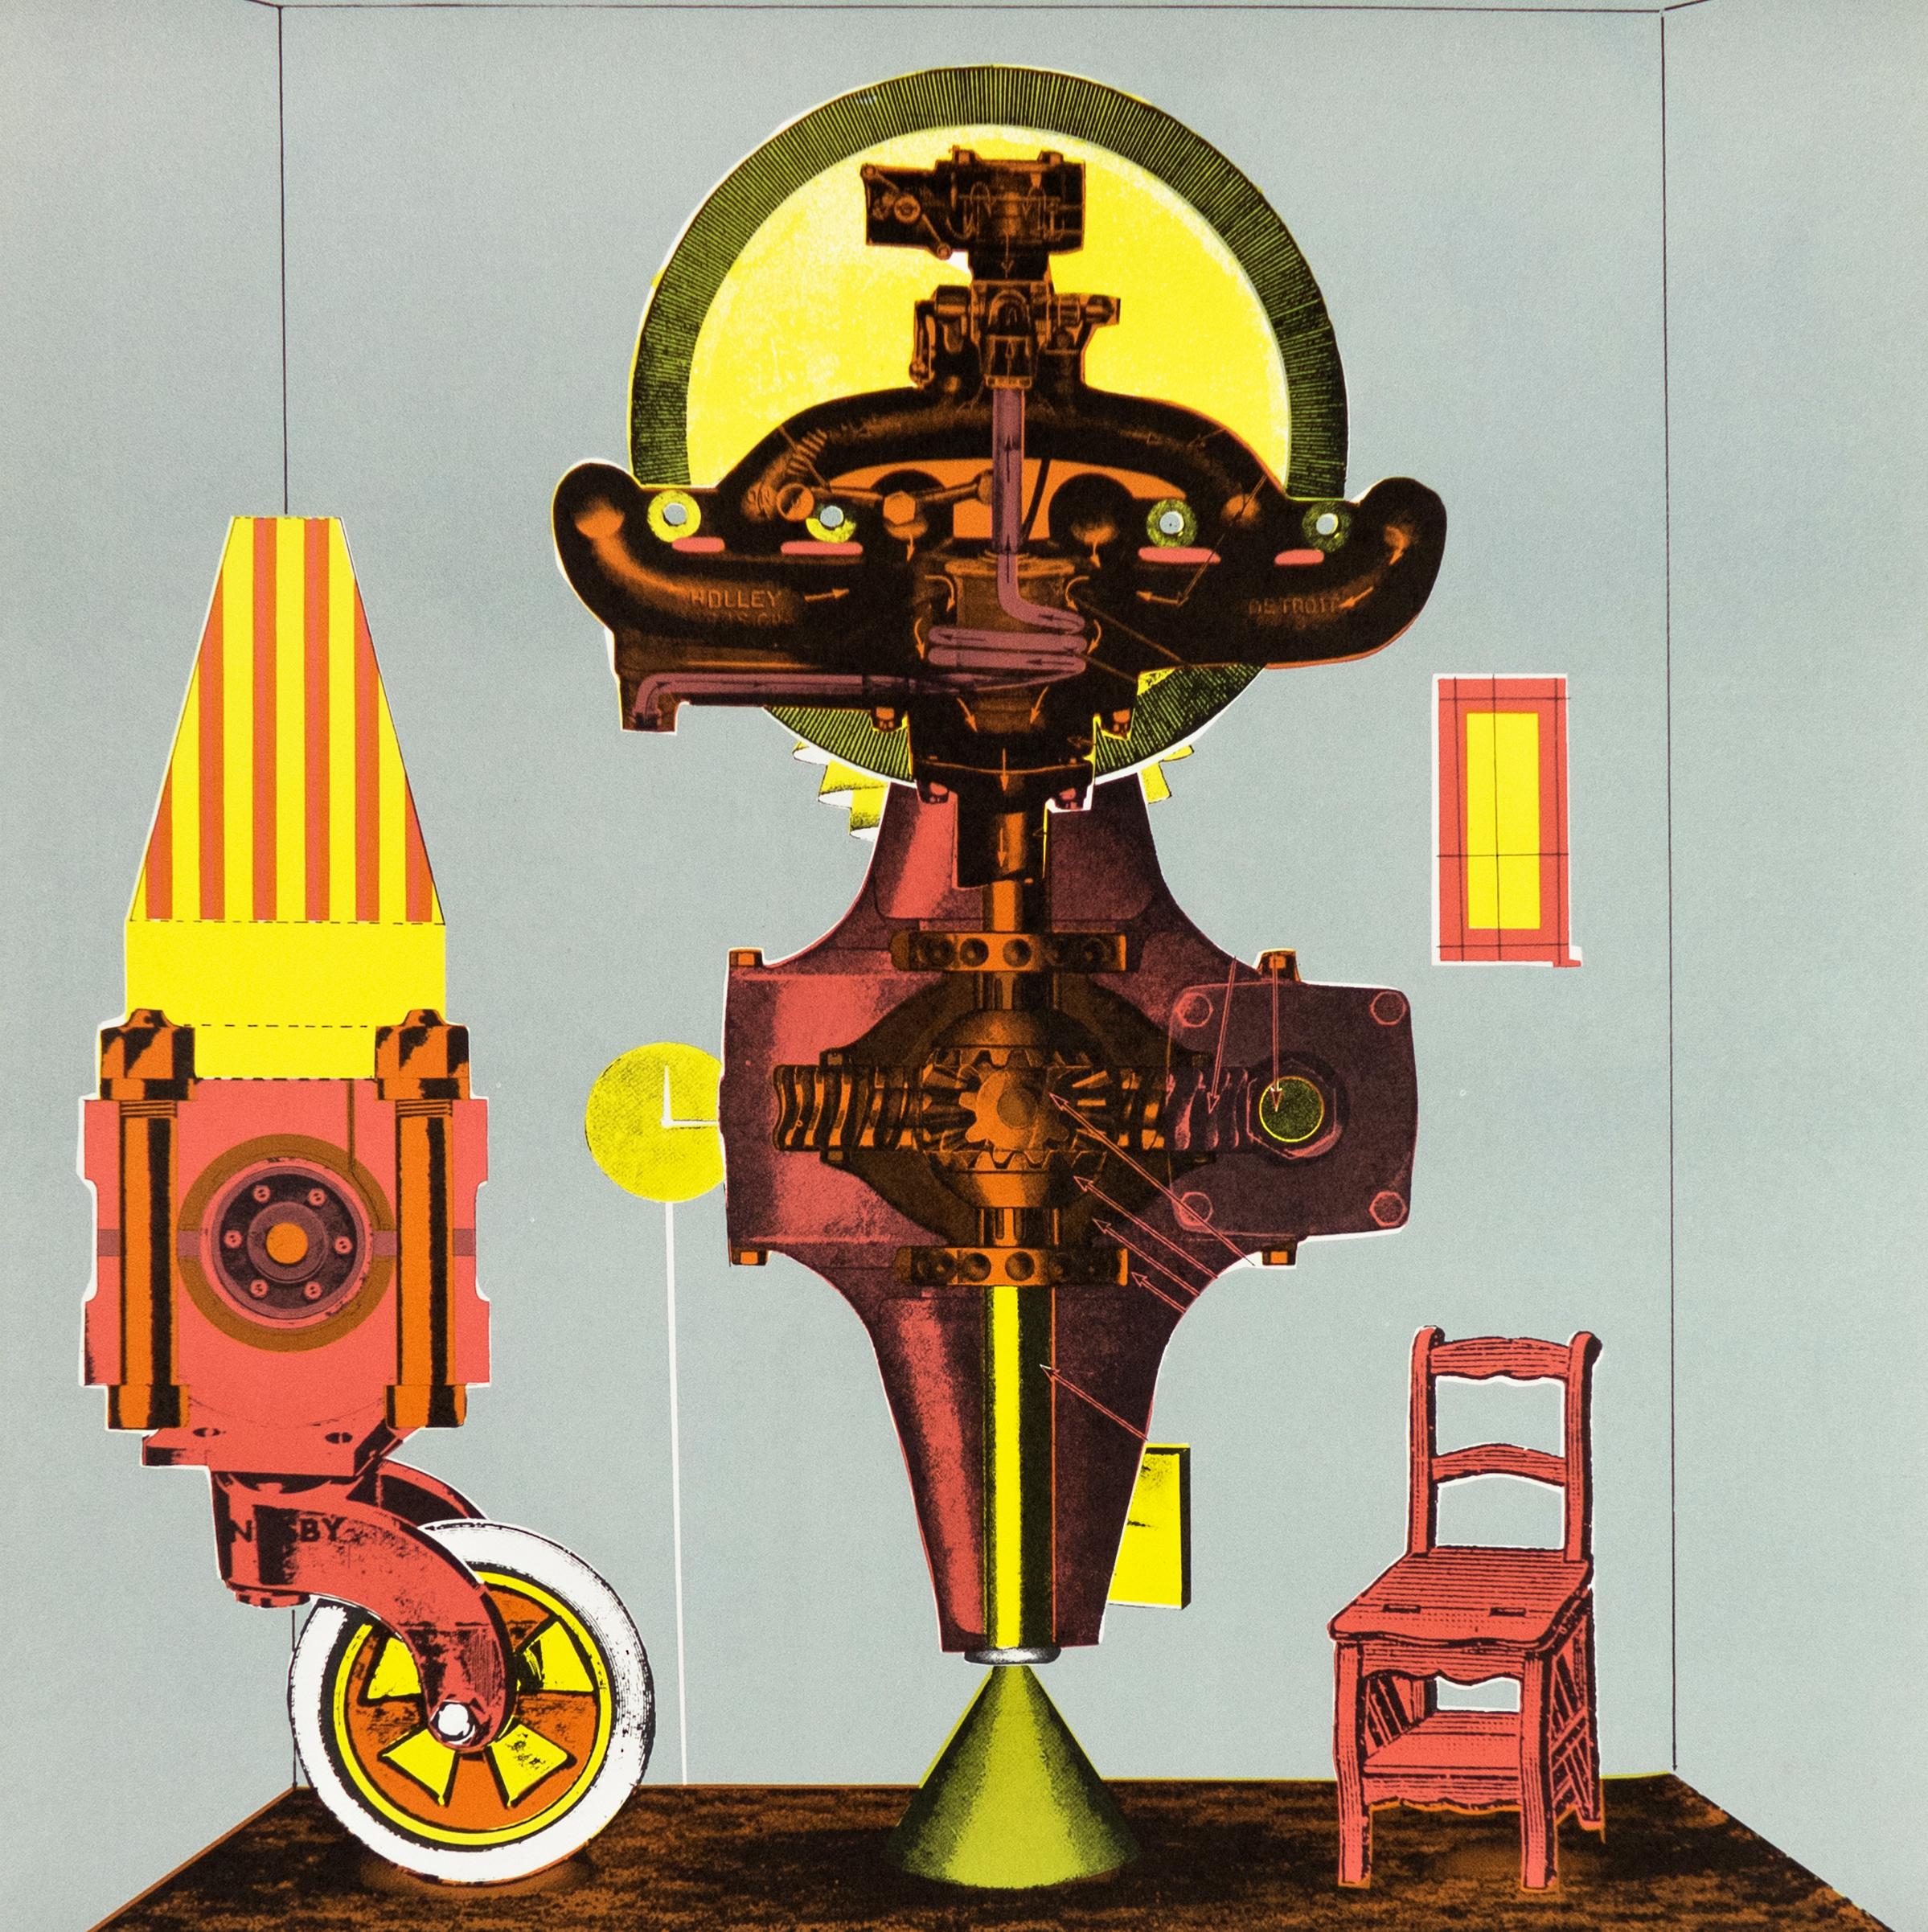 Paolozzi Signed 1969 poster Galerie Mikro vintage futuristic psychedelic pop art - Print by Eduardo Paolozzi